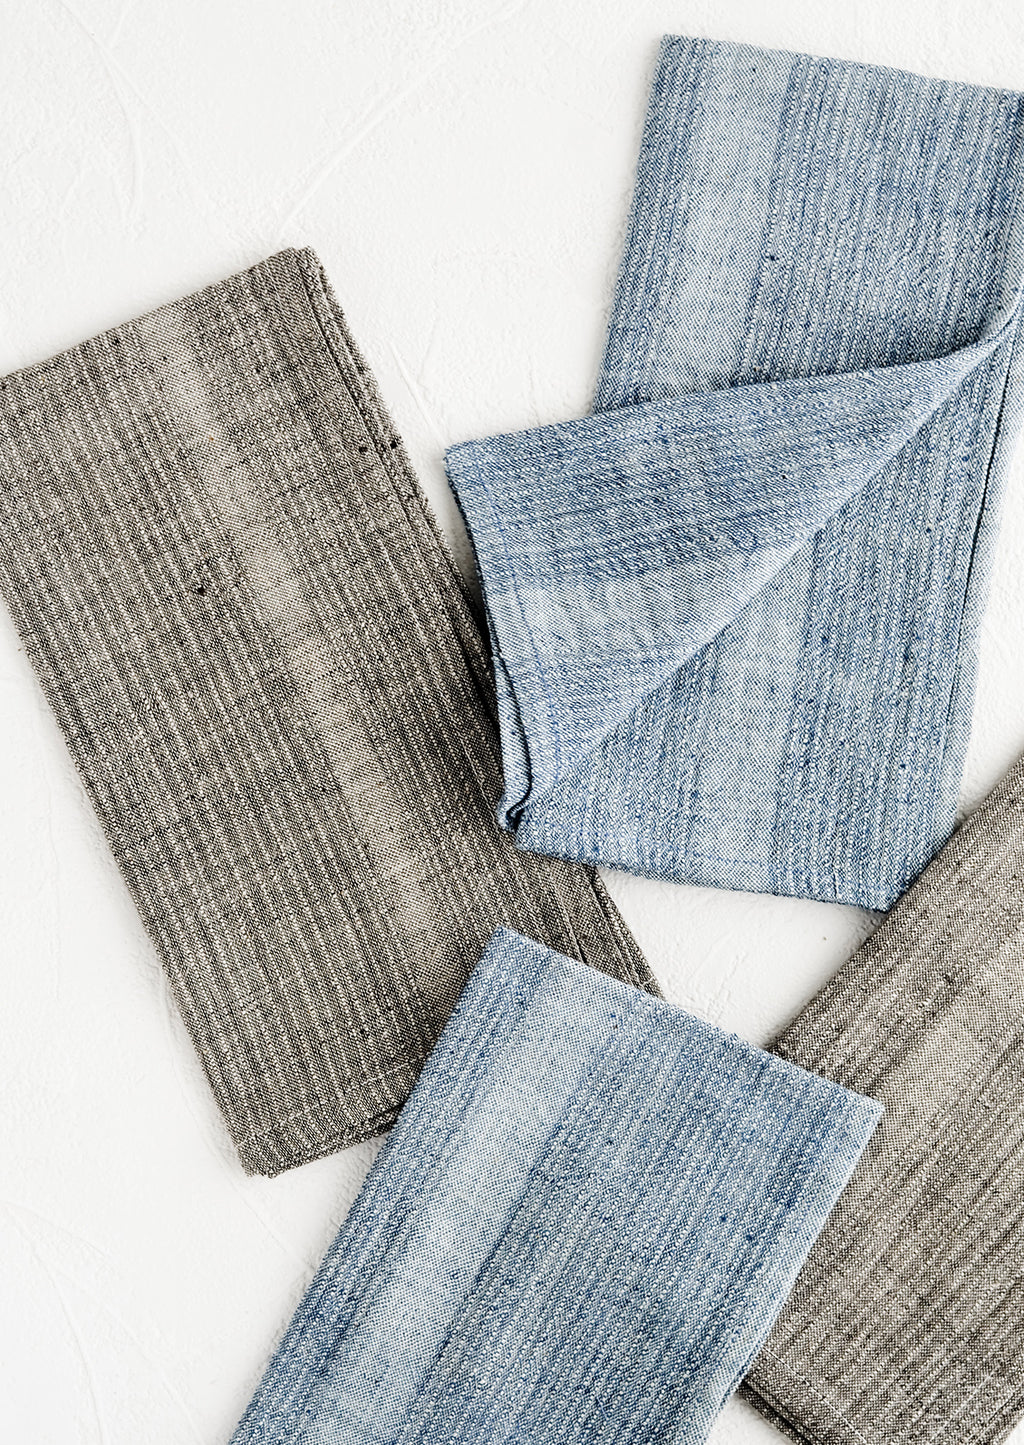 4: Fabric napkins in indigo and charcoal with textured tonal stripe pattern.